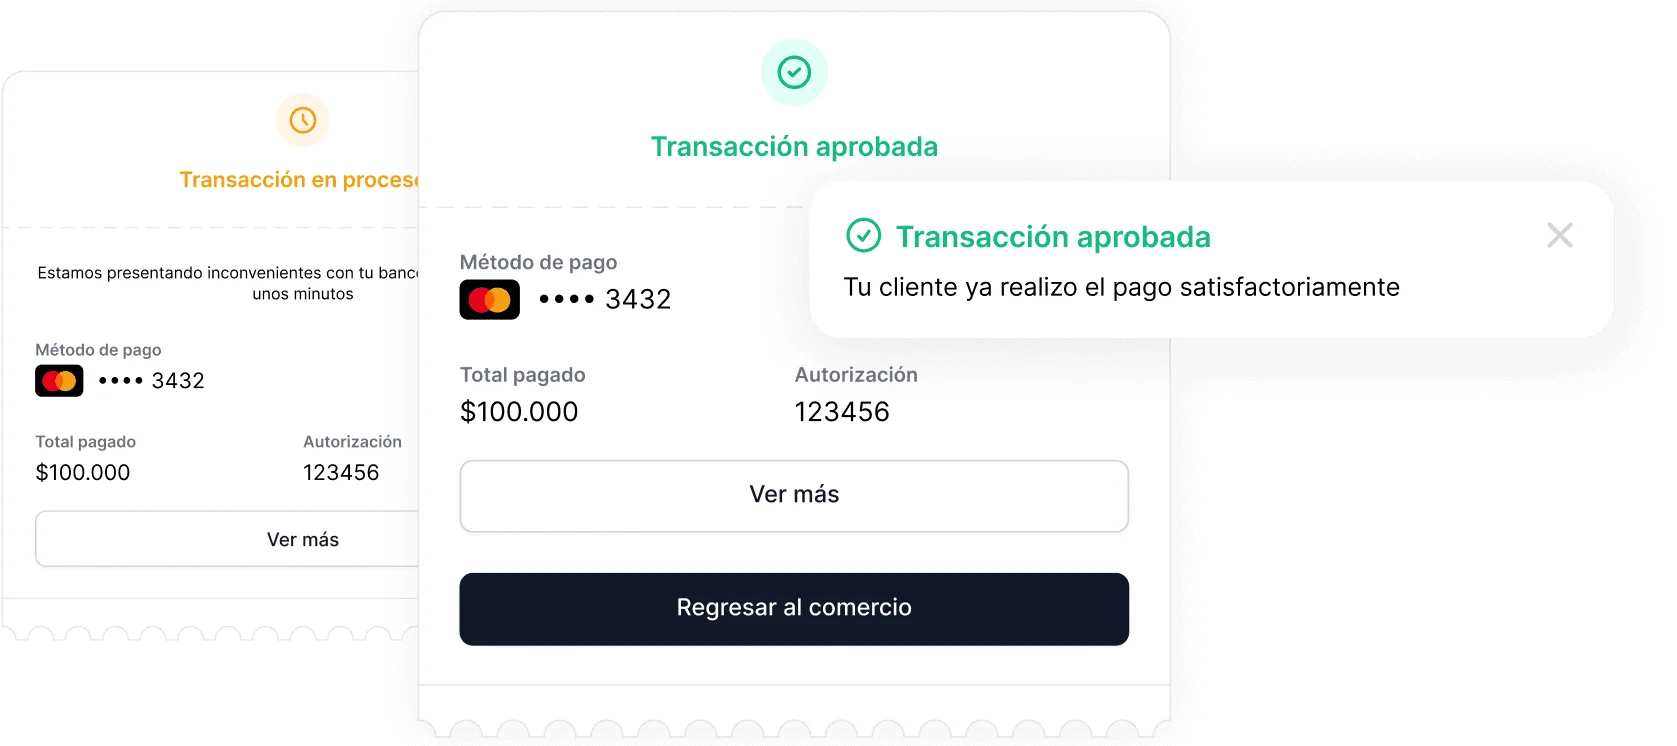 Receive instant notifications of transaction status